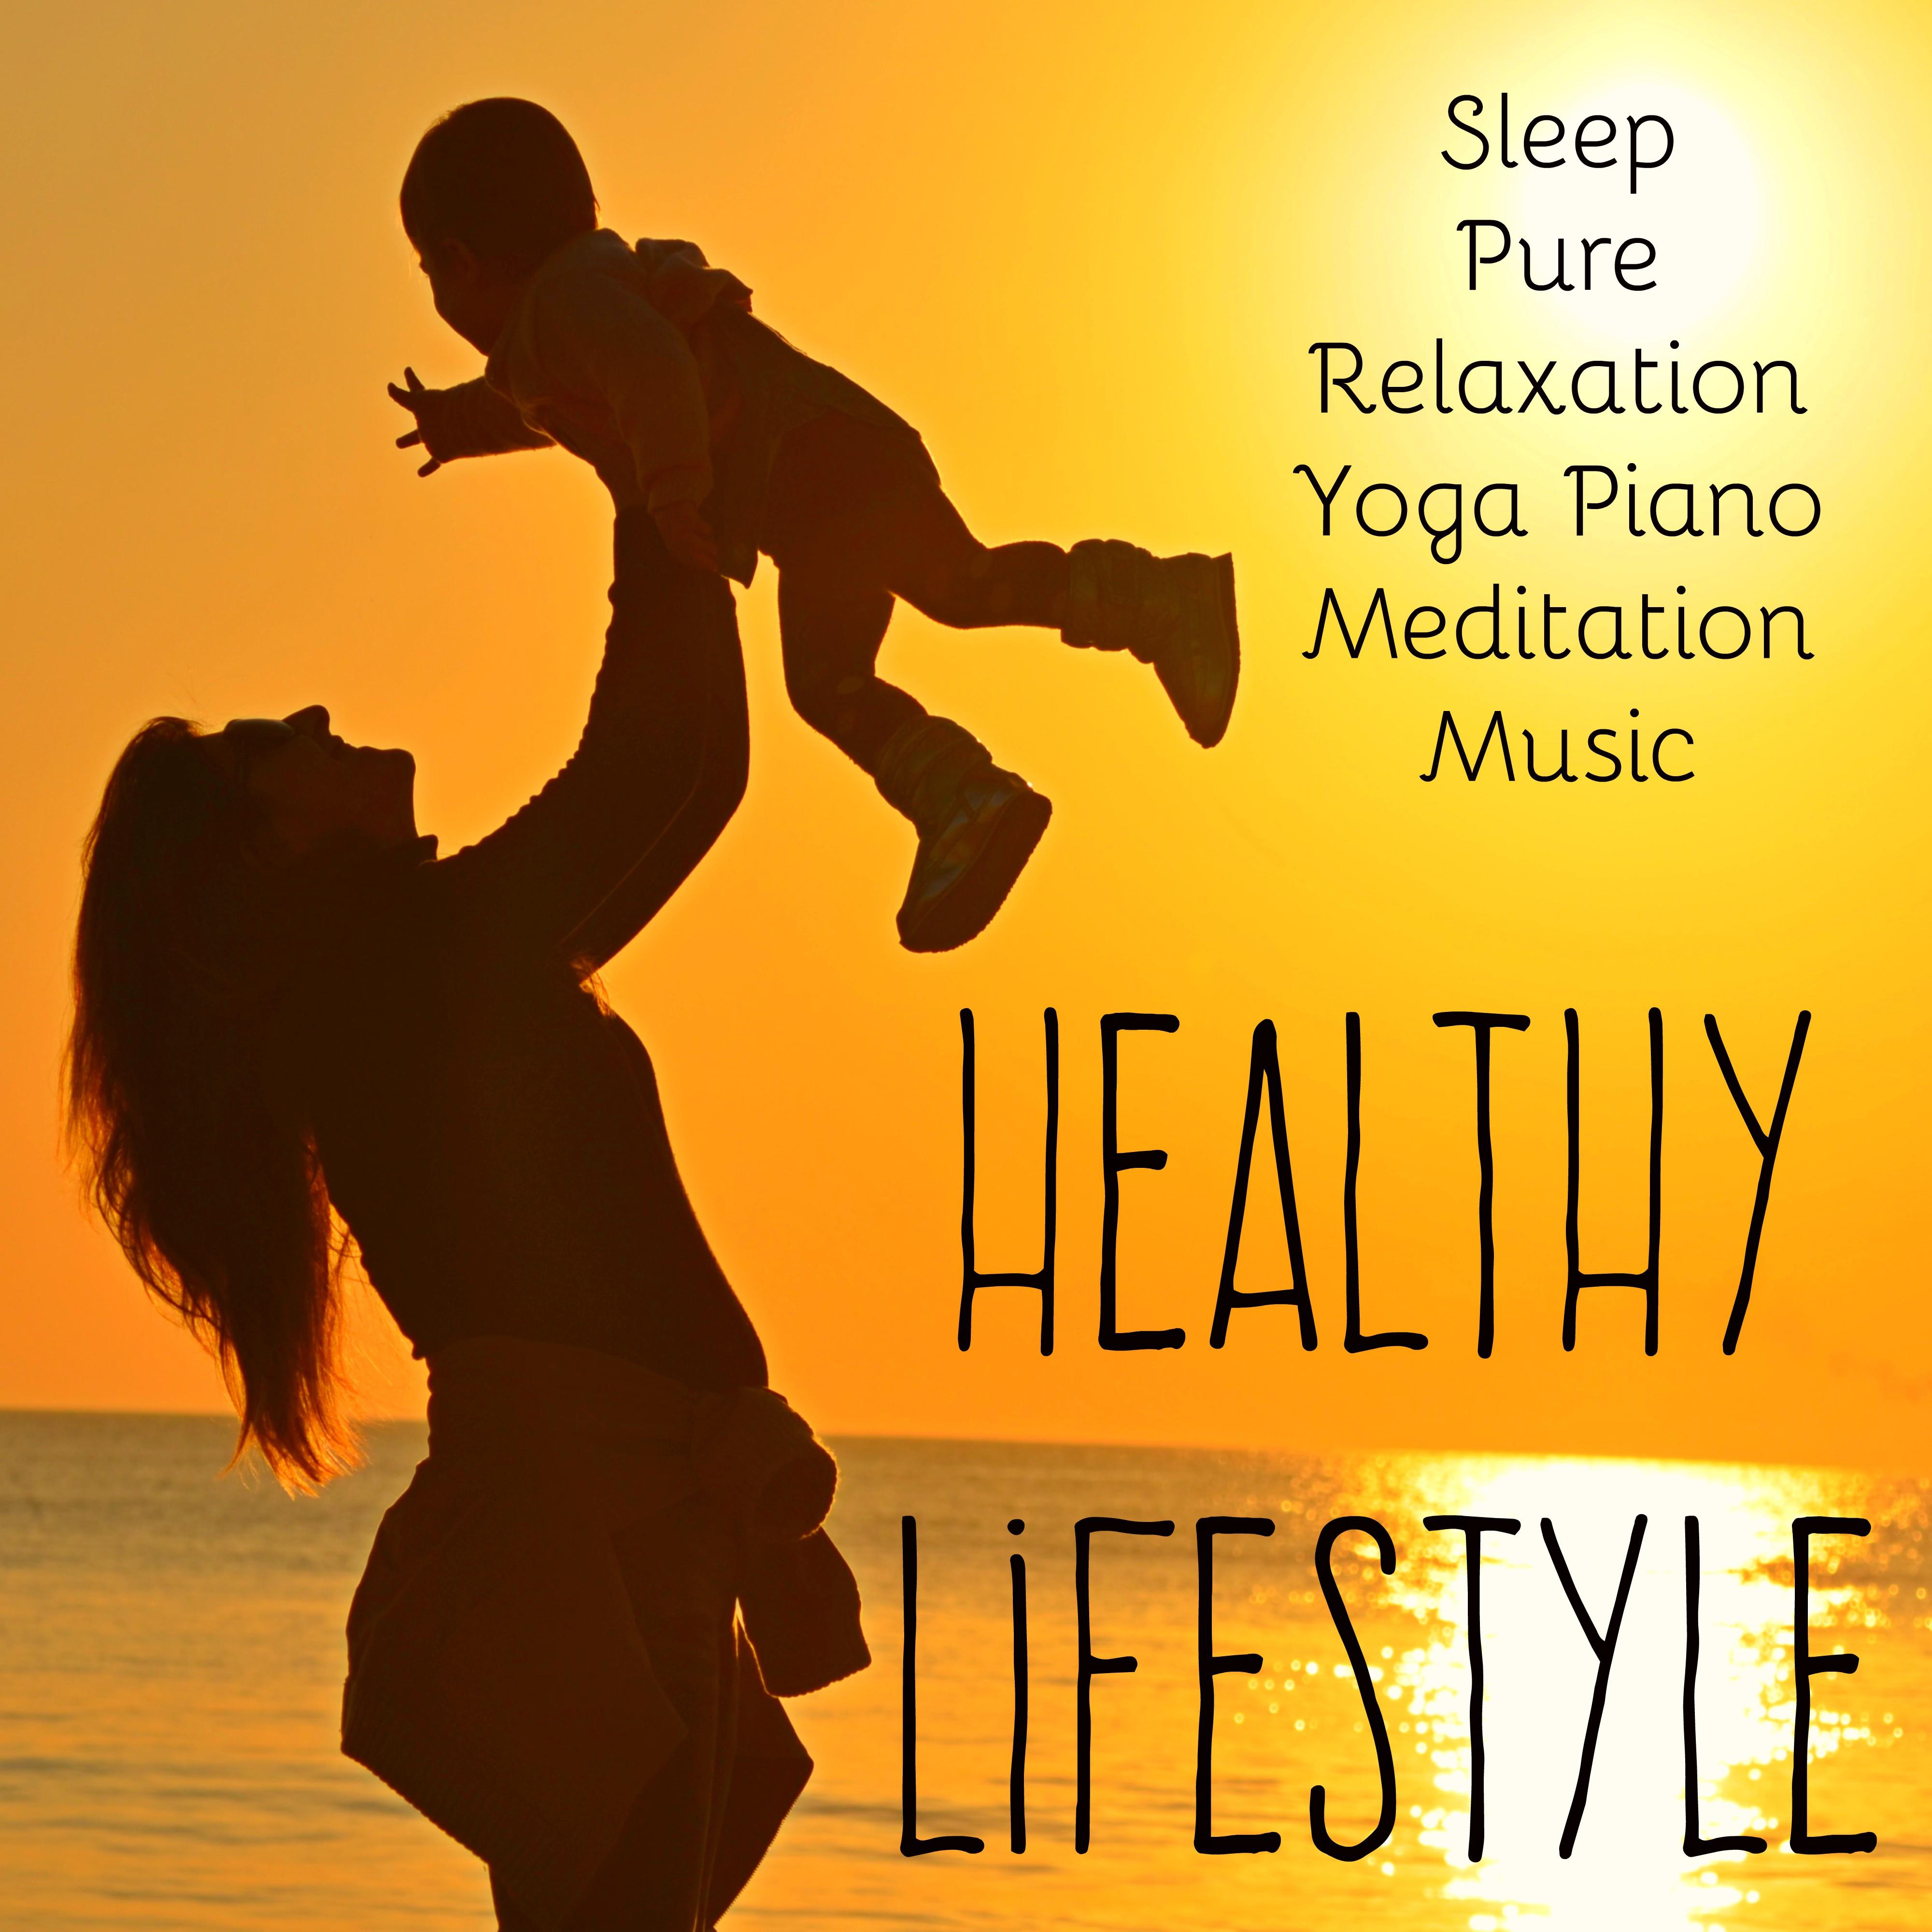 Healthy Lifestyle - Sleep Pure Relaxation Yoga Piano Meditation Music Academy for Bio Energy Healing Reiki Therapy Chakra Cleansing and Open Minded